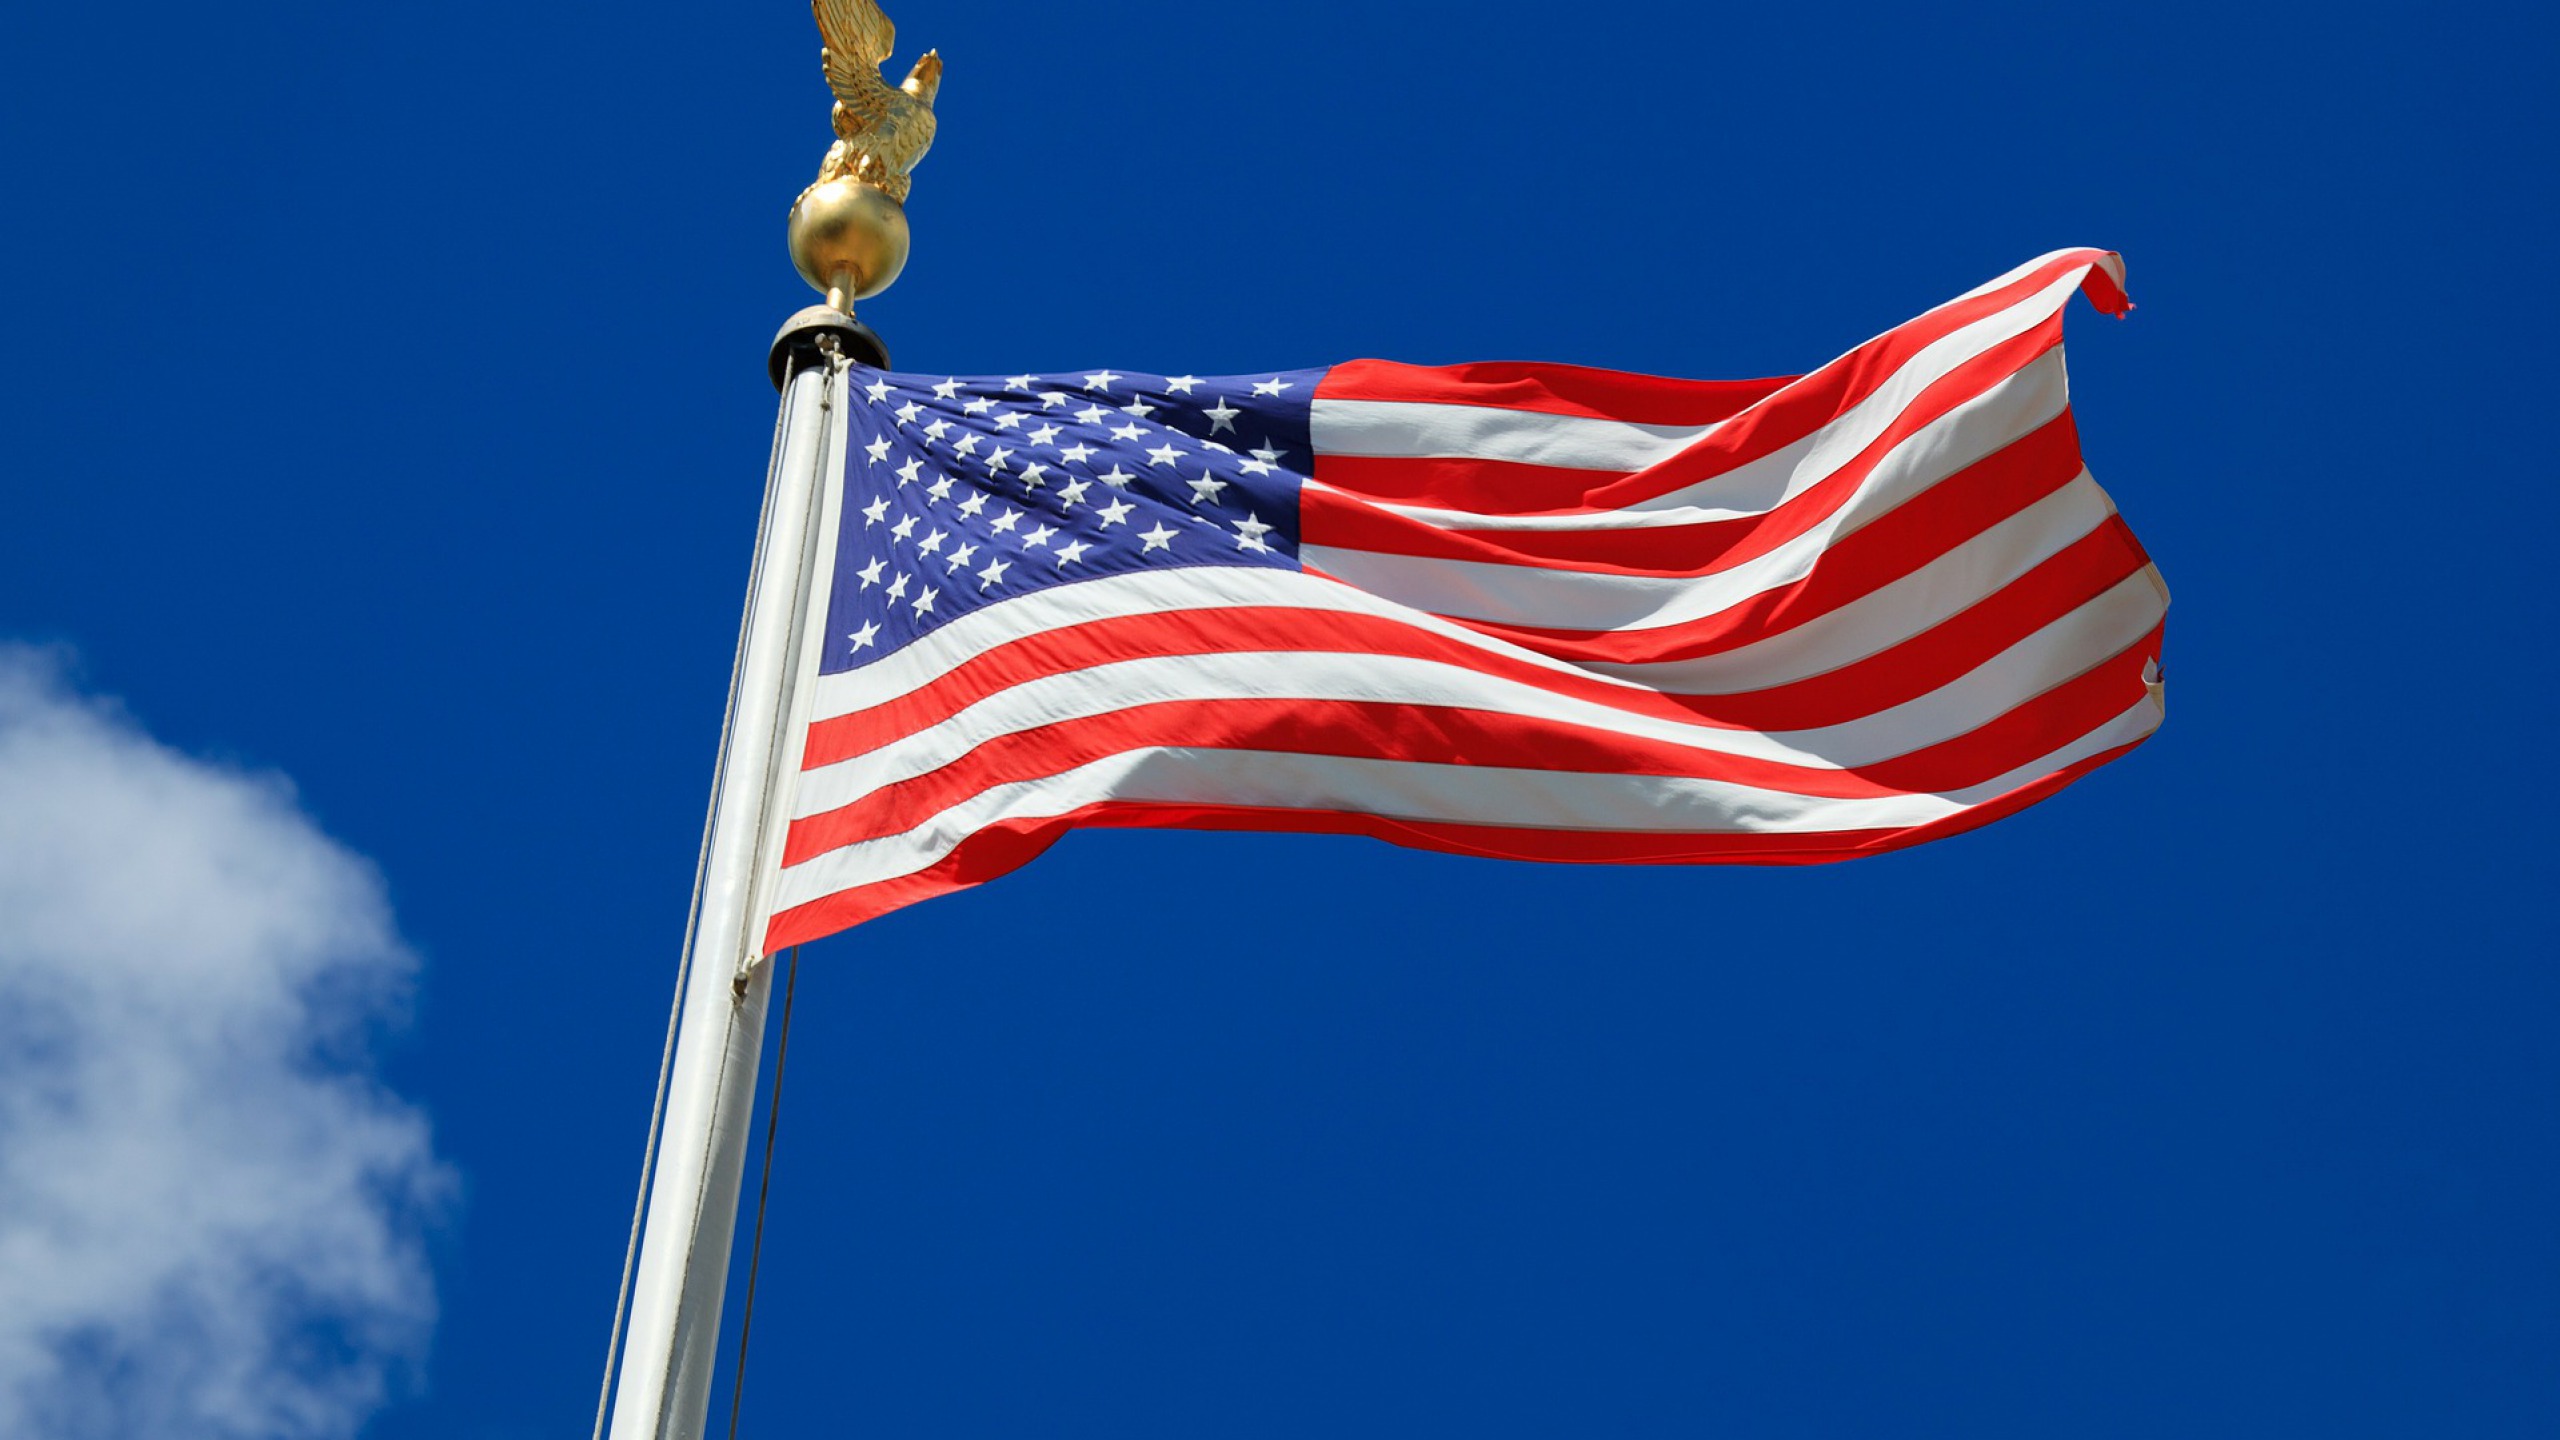 Wallpaper Of The Day US Flag   Common Sense Evaluation